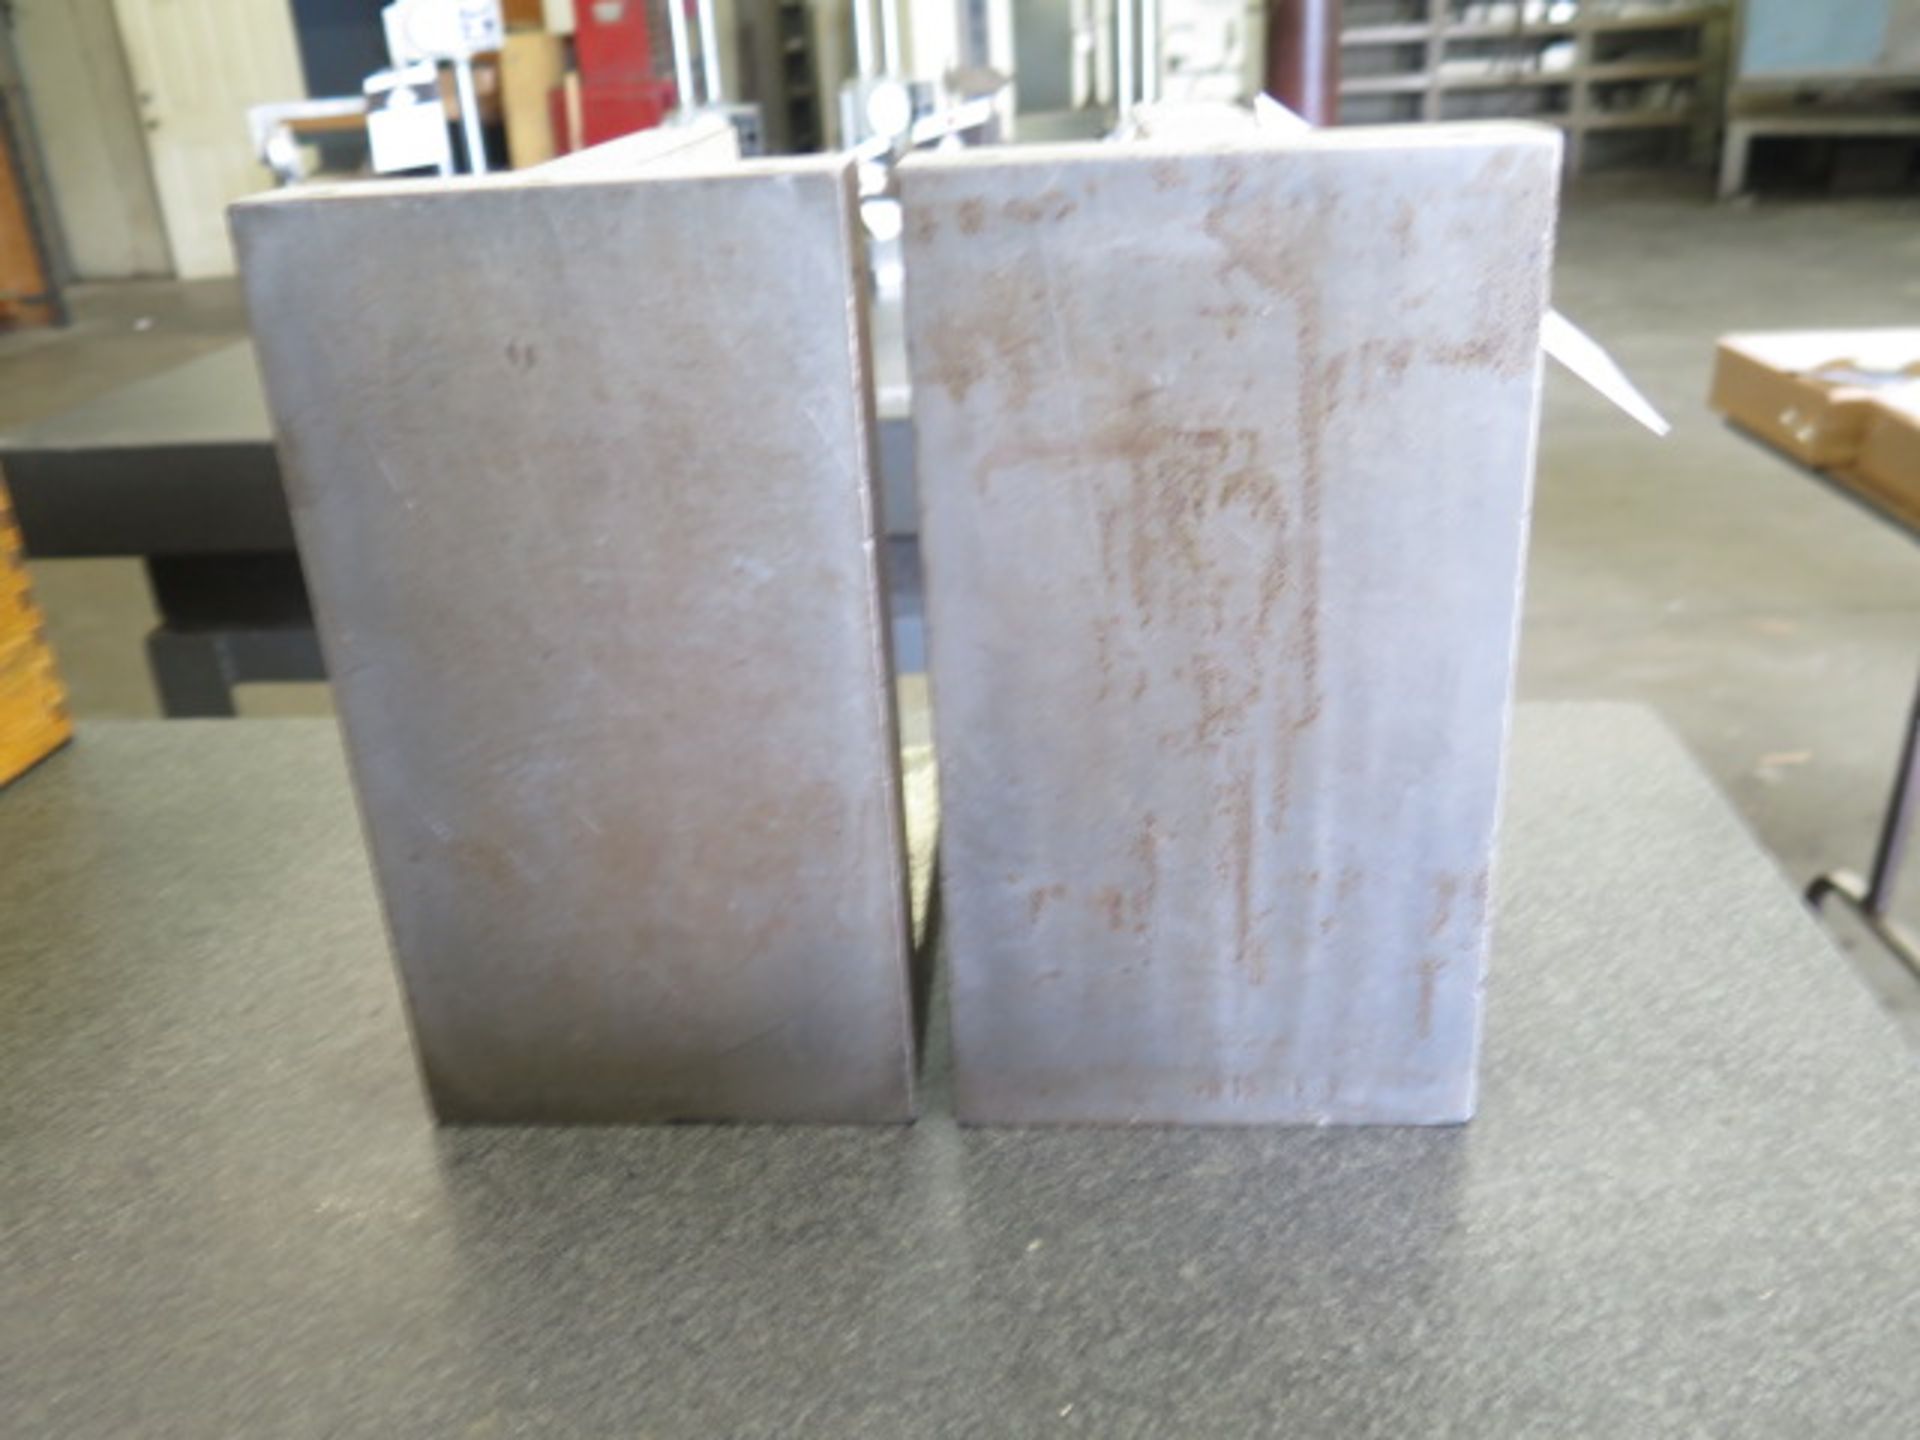 5 ½” x 10” x 7” Angle Masters (2) (SOLD AS-IS - NO WARRANTY) - Image 2 of 3